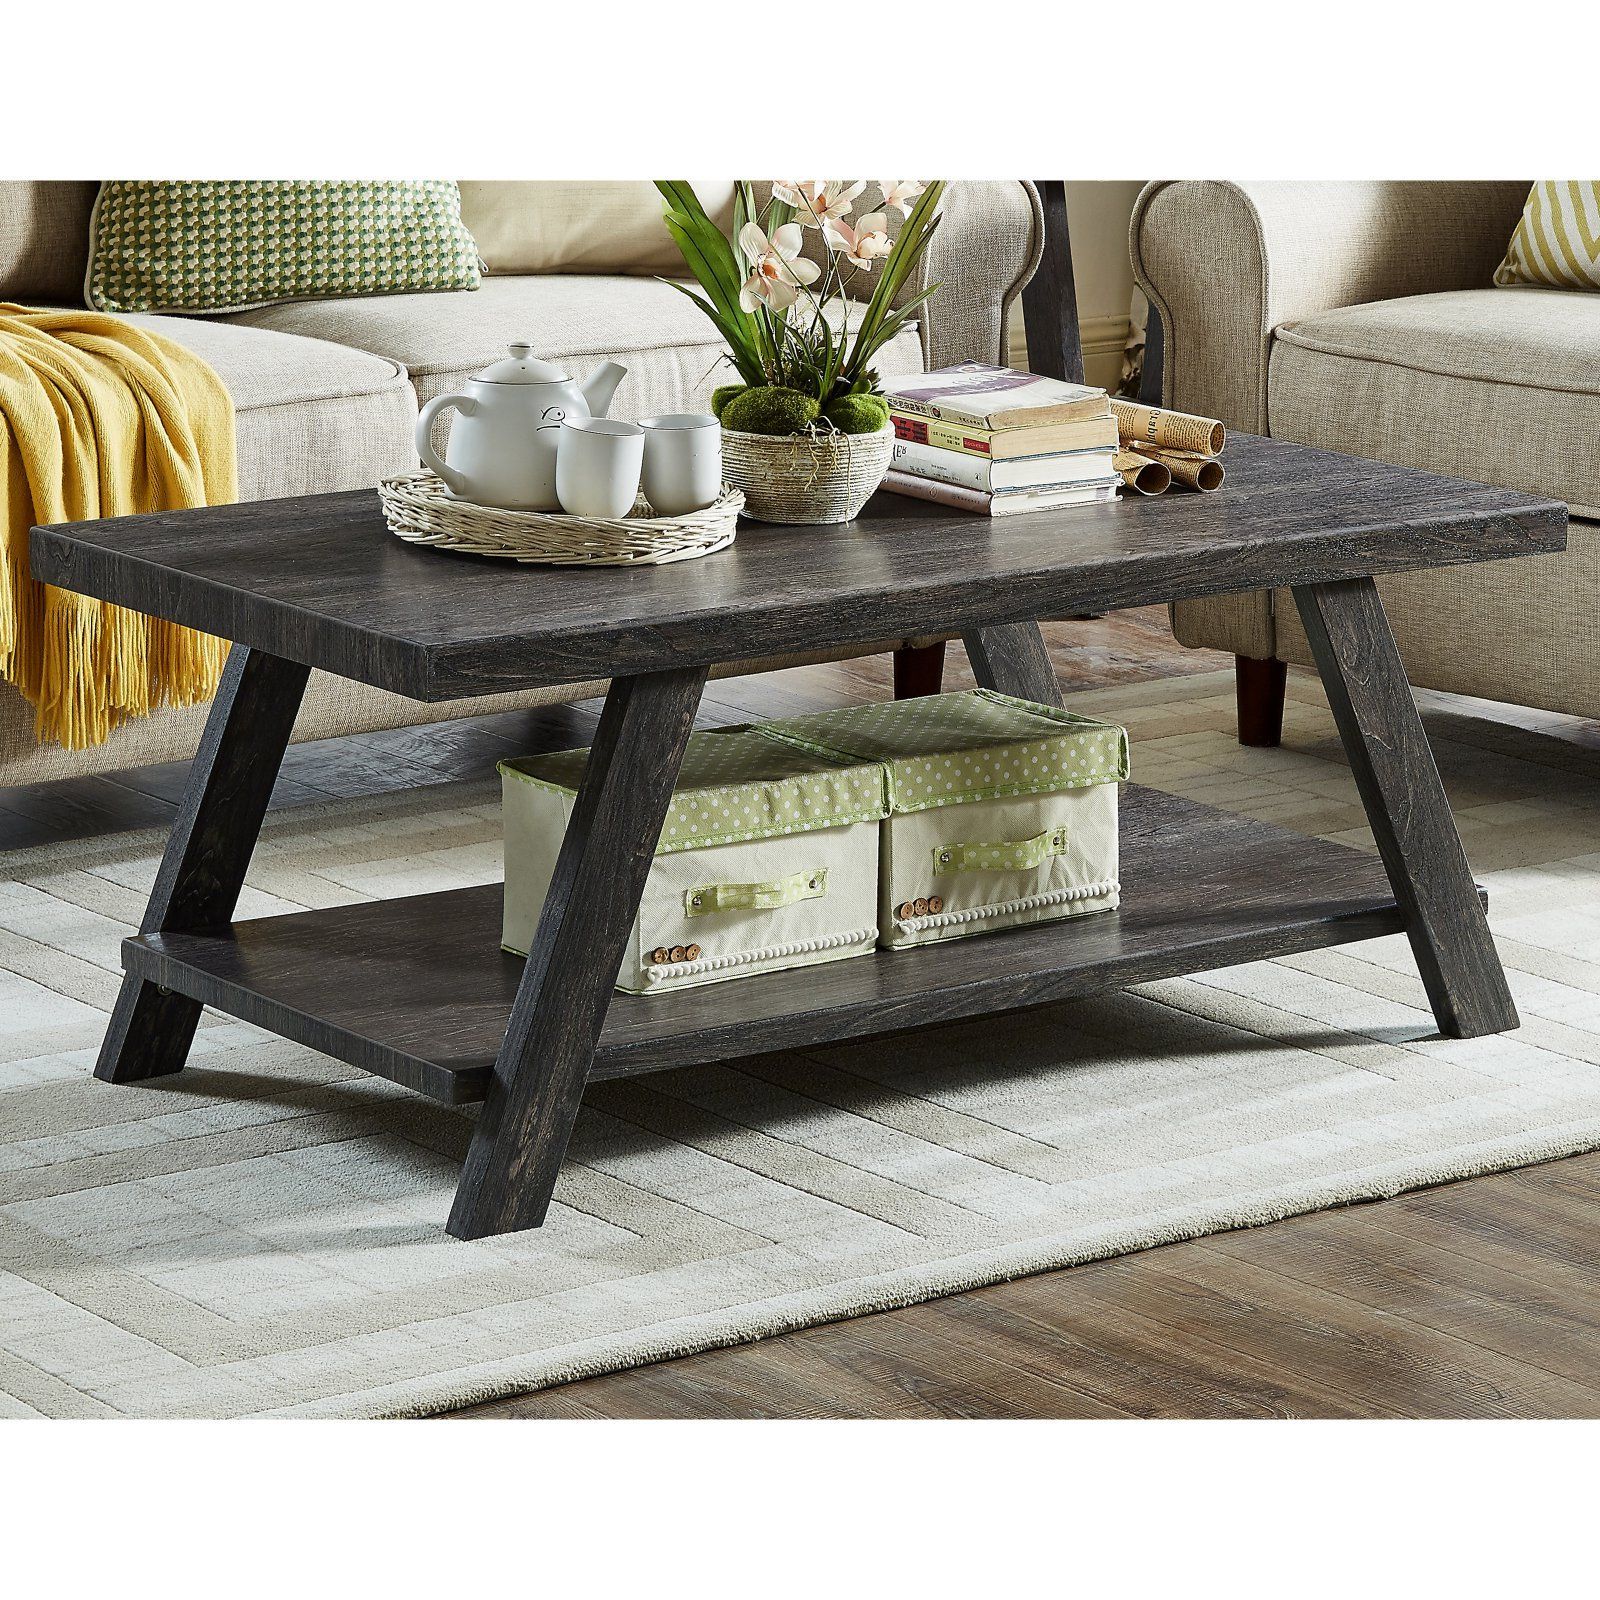 Well Liked Pemberly Row Replicated Wood Coffee Tables With Dimensions: 48w X 24d X 19h In.. Wood And Hardwood Veneer Construction (Photo 1 of 15)